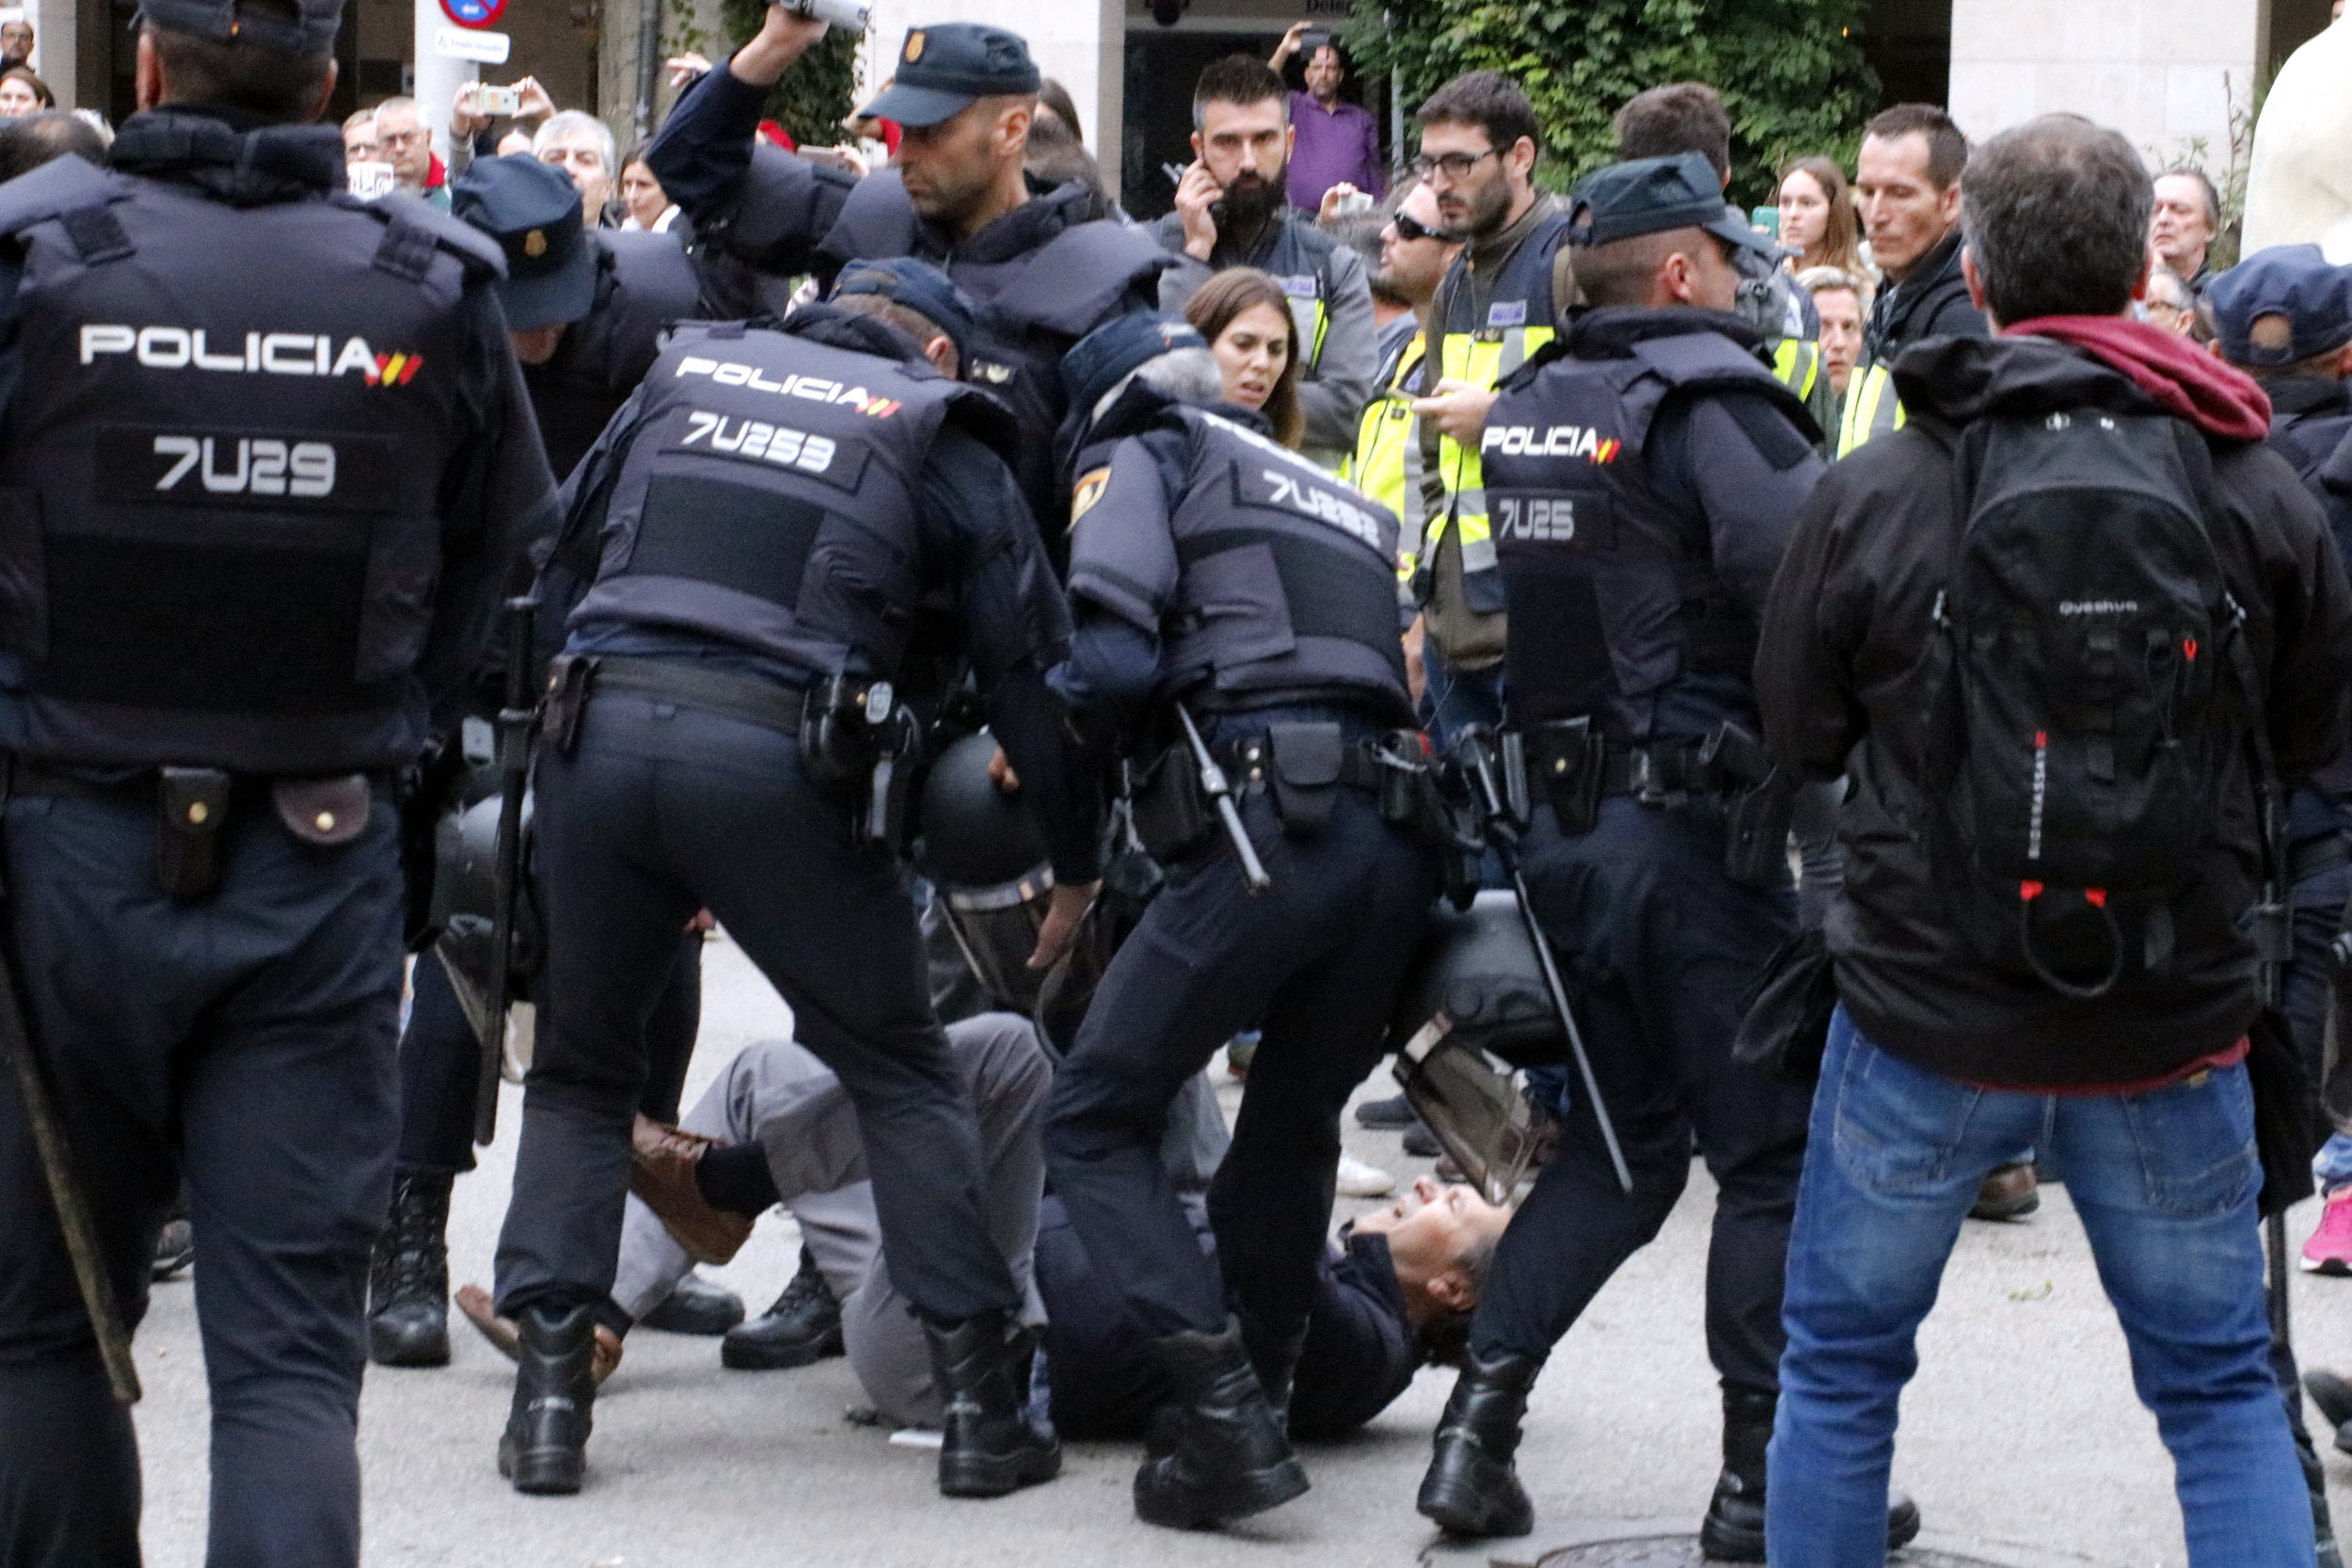 Some Spanish police officers charging some voters during the referendum on independence held in Catalonia on October 1, 2017 (by Gerard Vilà)